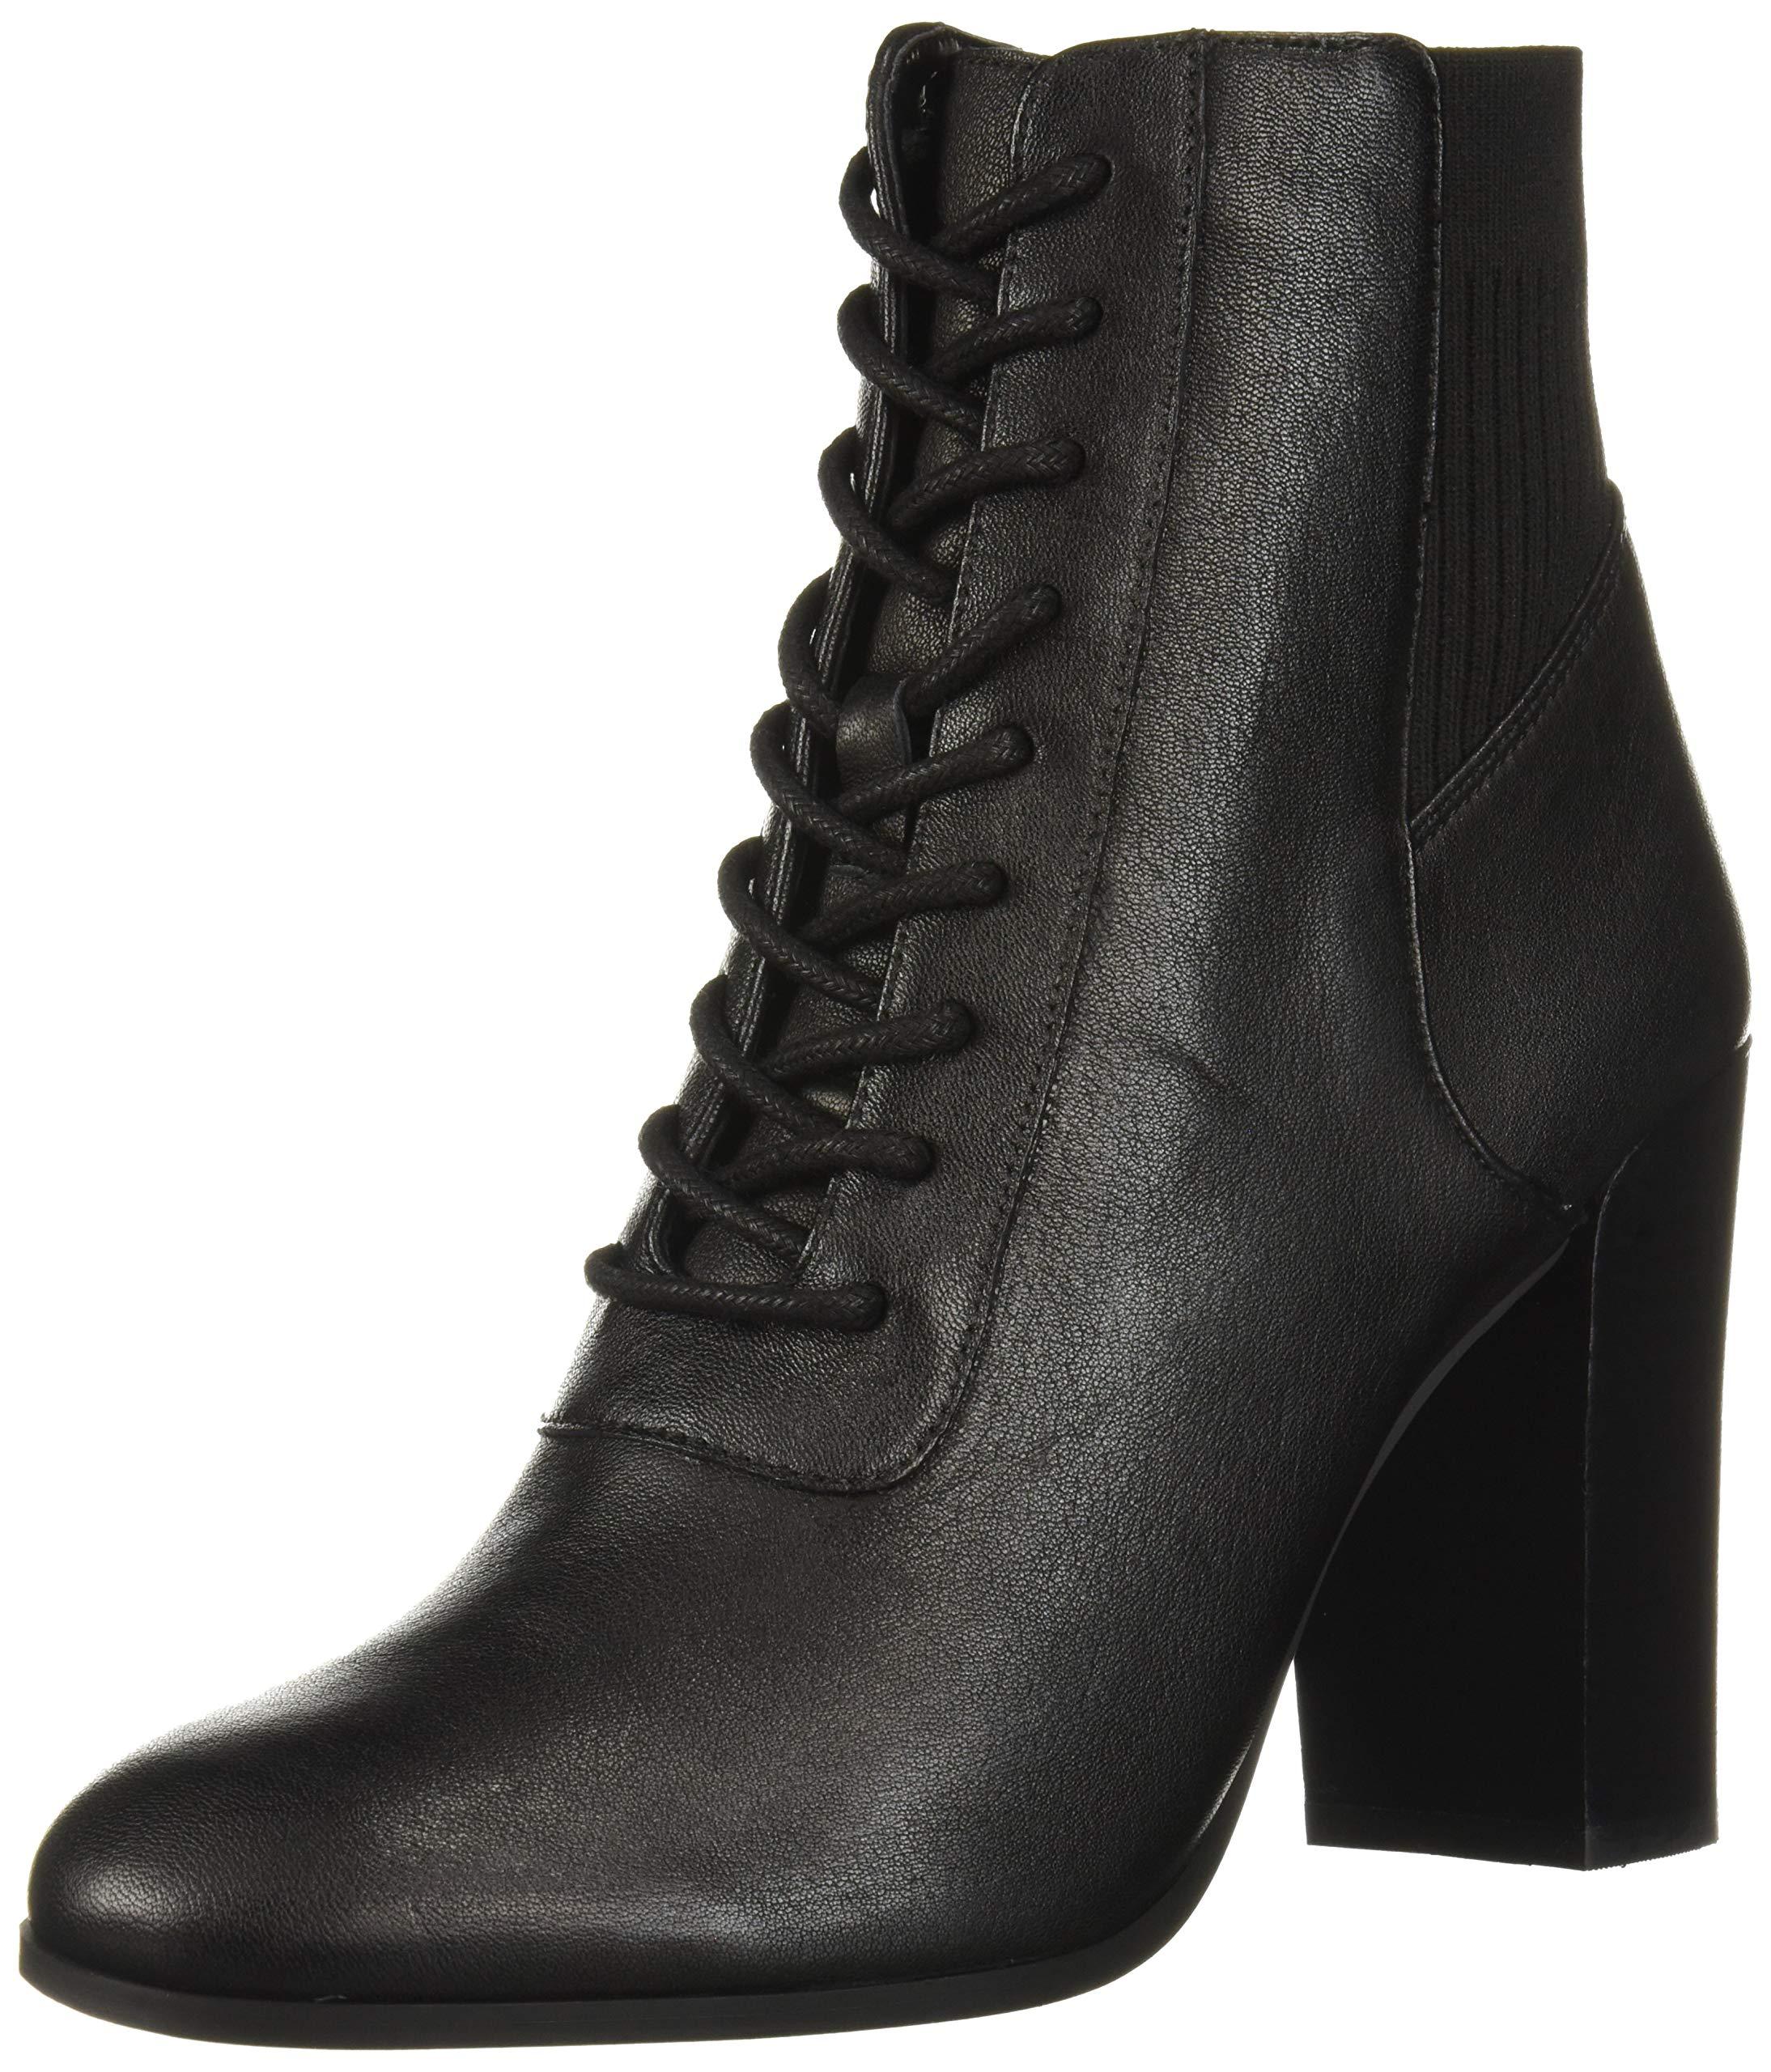 Kenneth Cole Justin Lace Up Bootie Fashion Boot in Black - Lyst